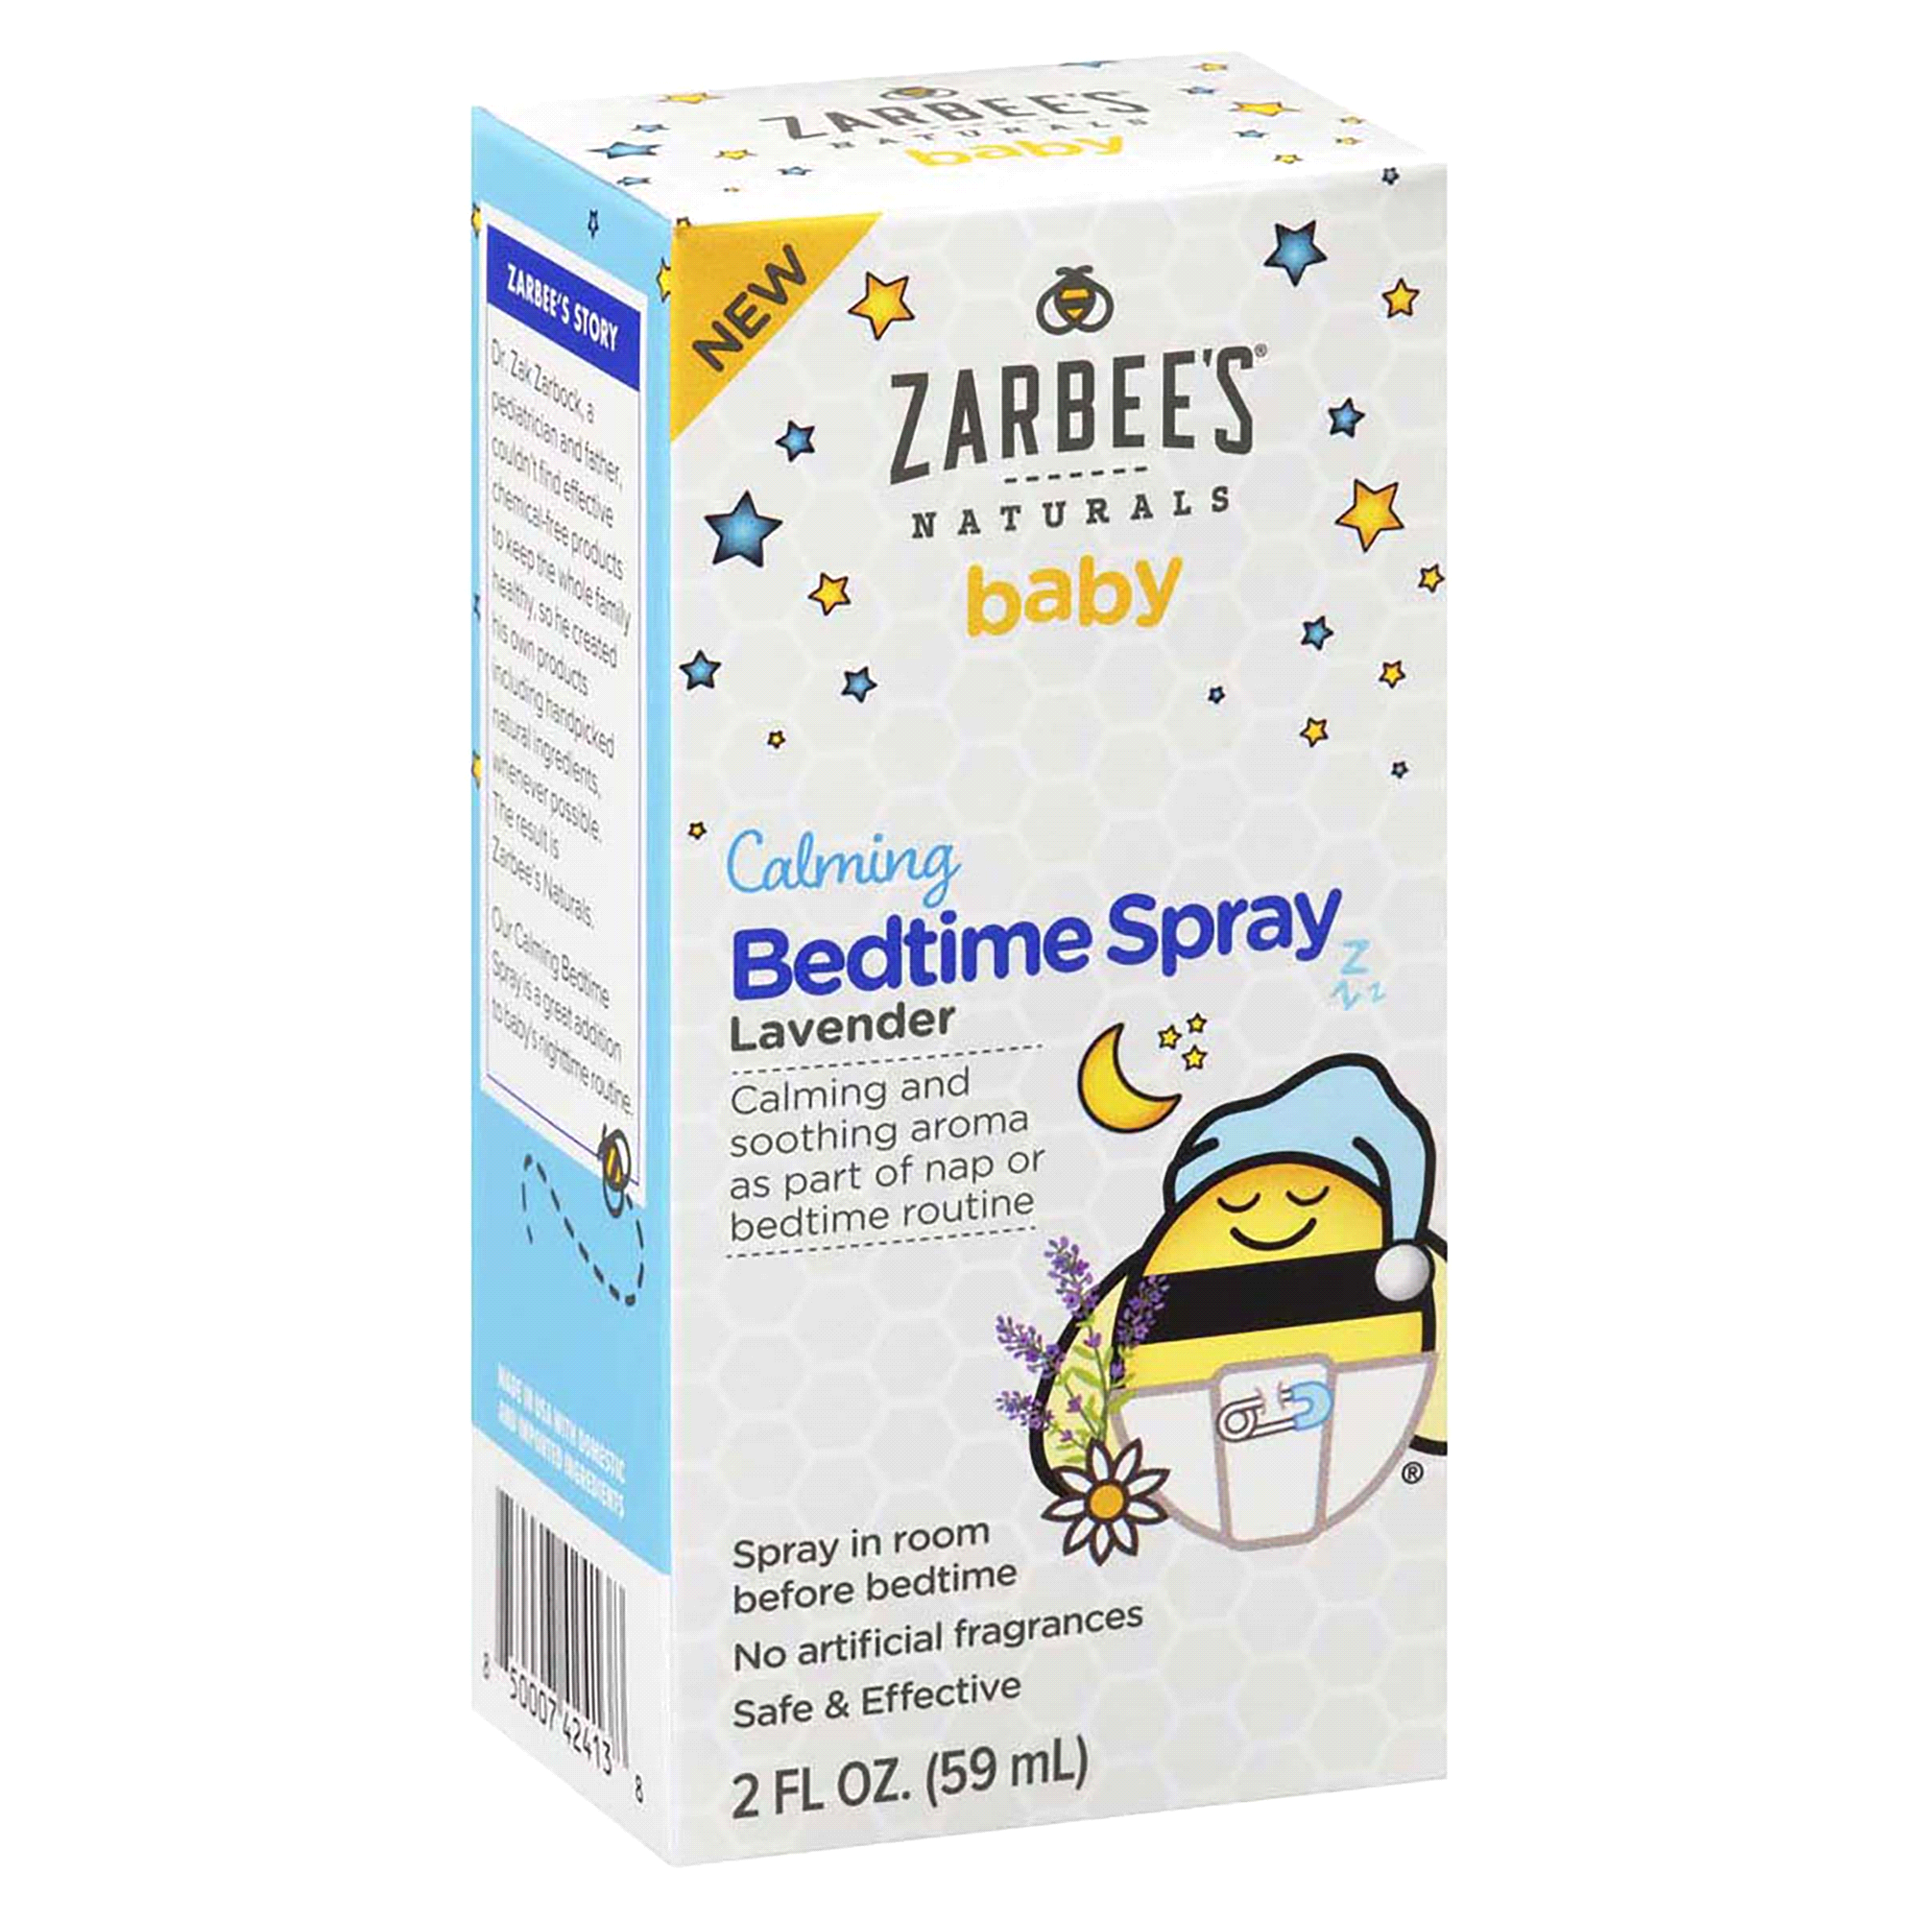 slide 6 of 13, Zarbee's Naturals Baby Sleep Spray, Calming Bedtime Spray with Natural Lavender and Chamomile to Help Infant
Nighttime Routine, 2oz Bottle, 2 fl oz